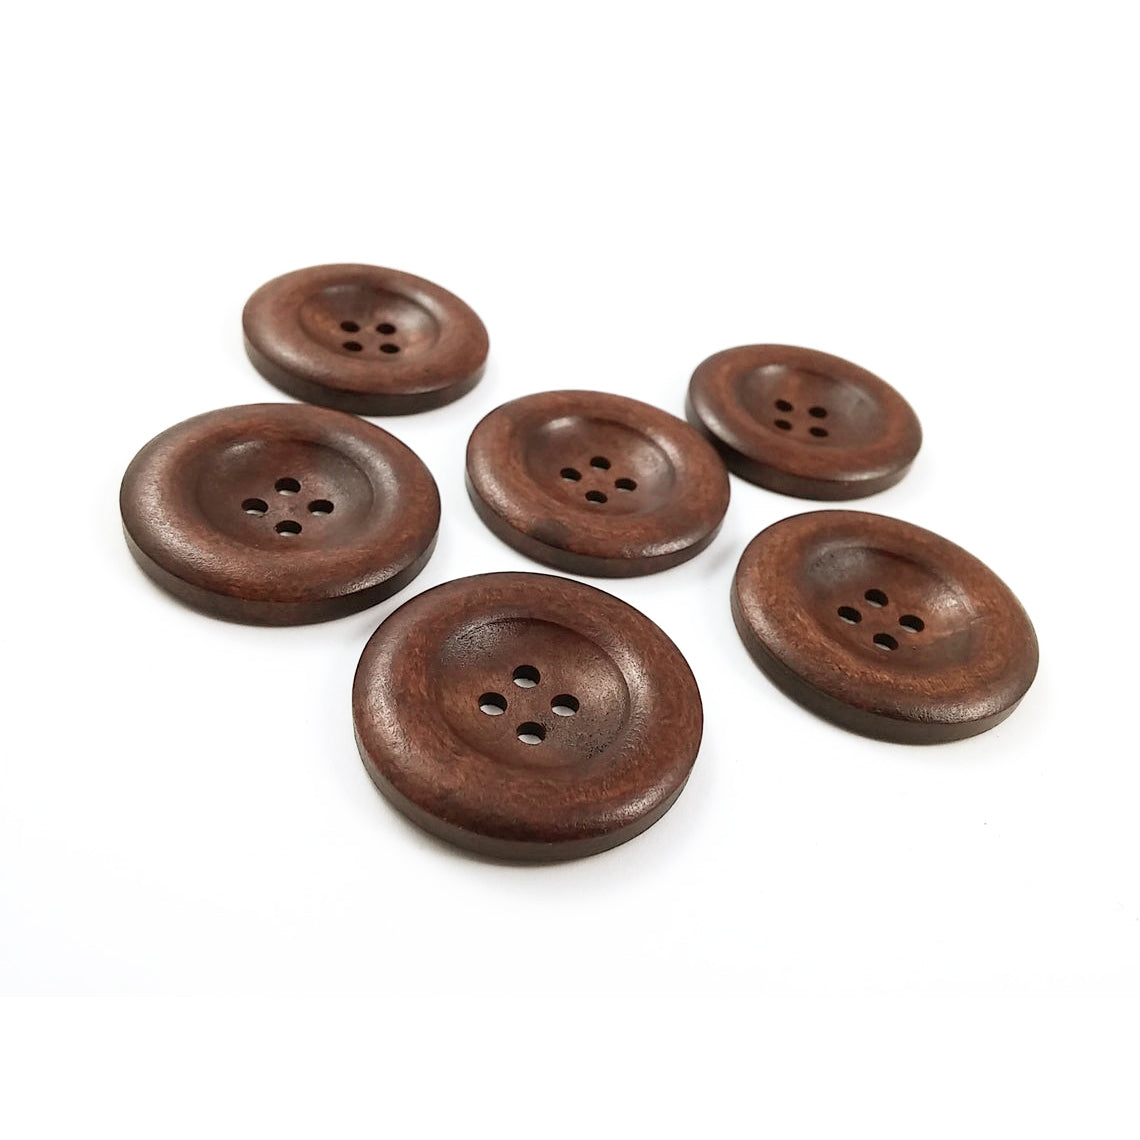 Brown Wooden Sewing Buttons 35mm - set of 6 natural wood button